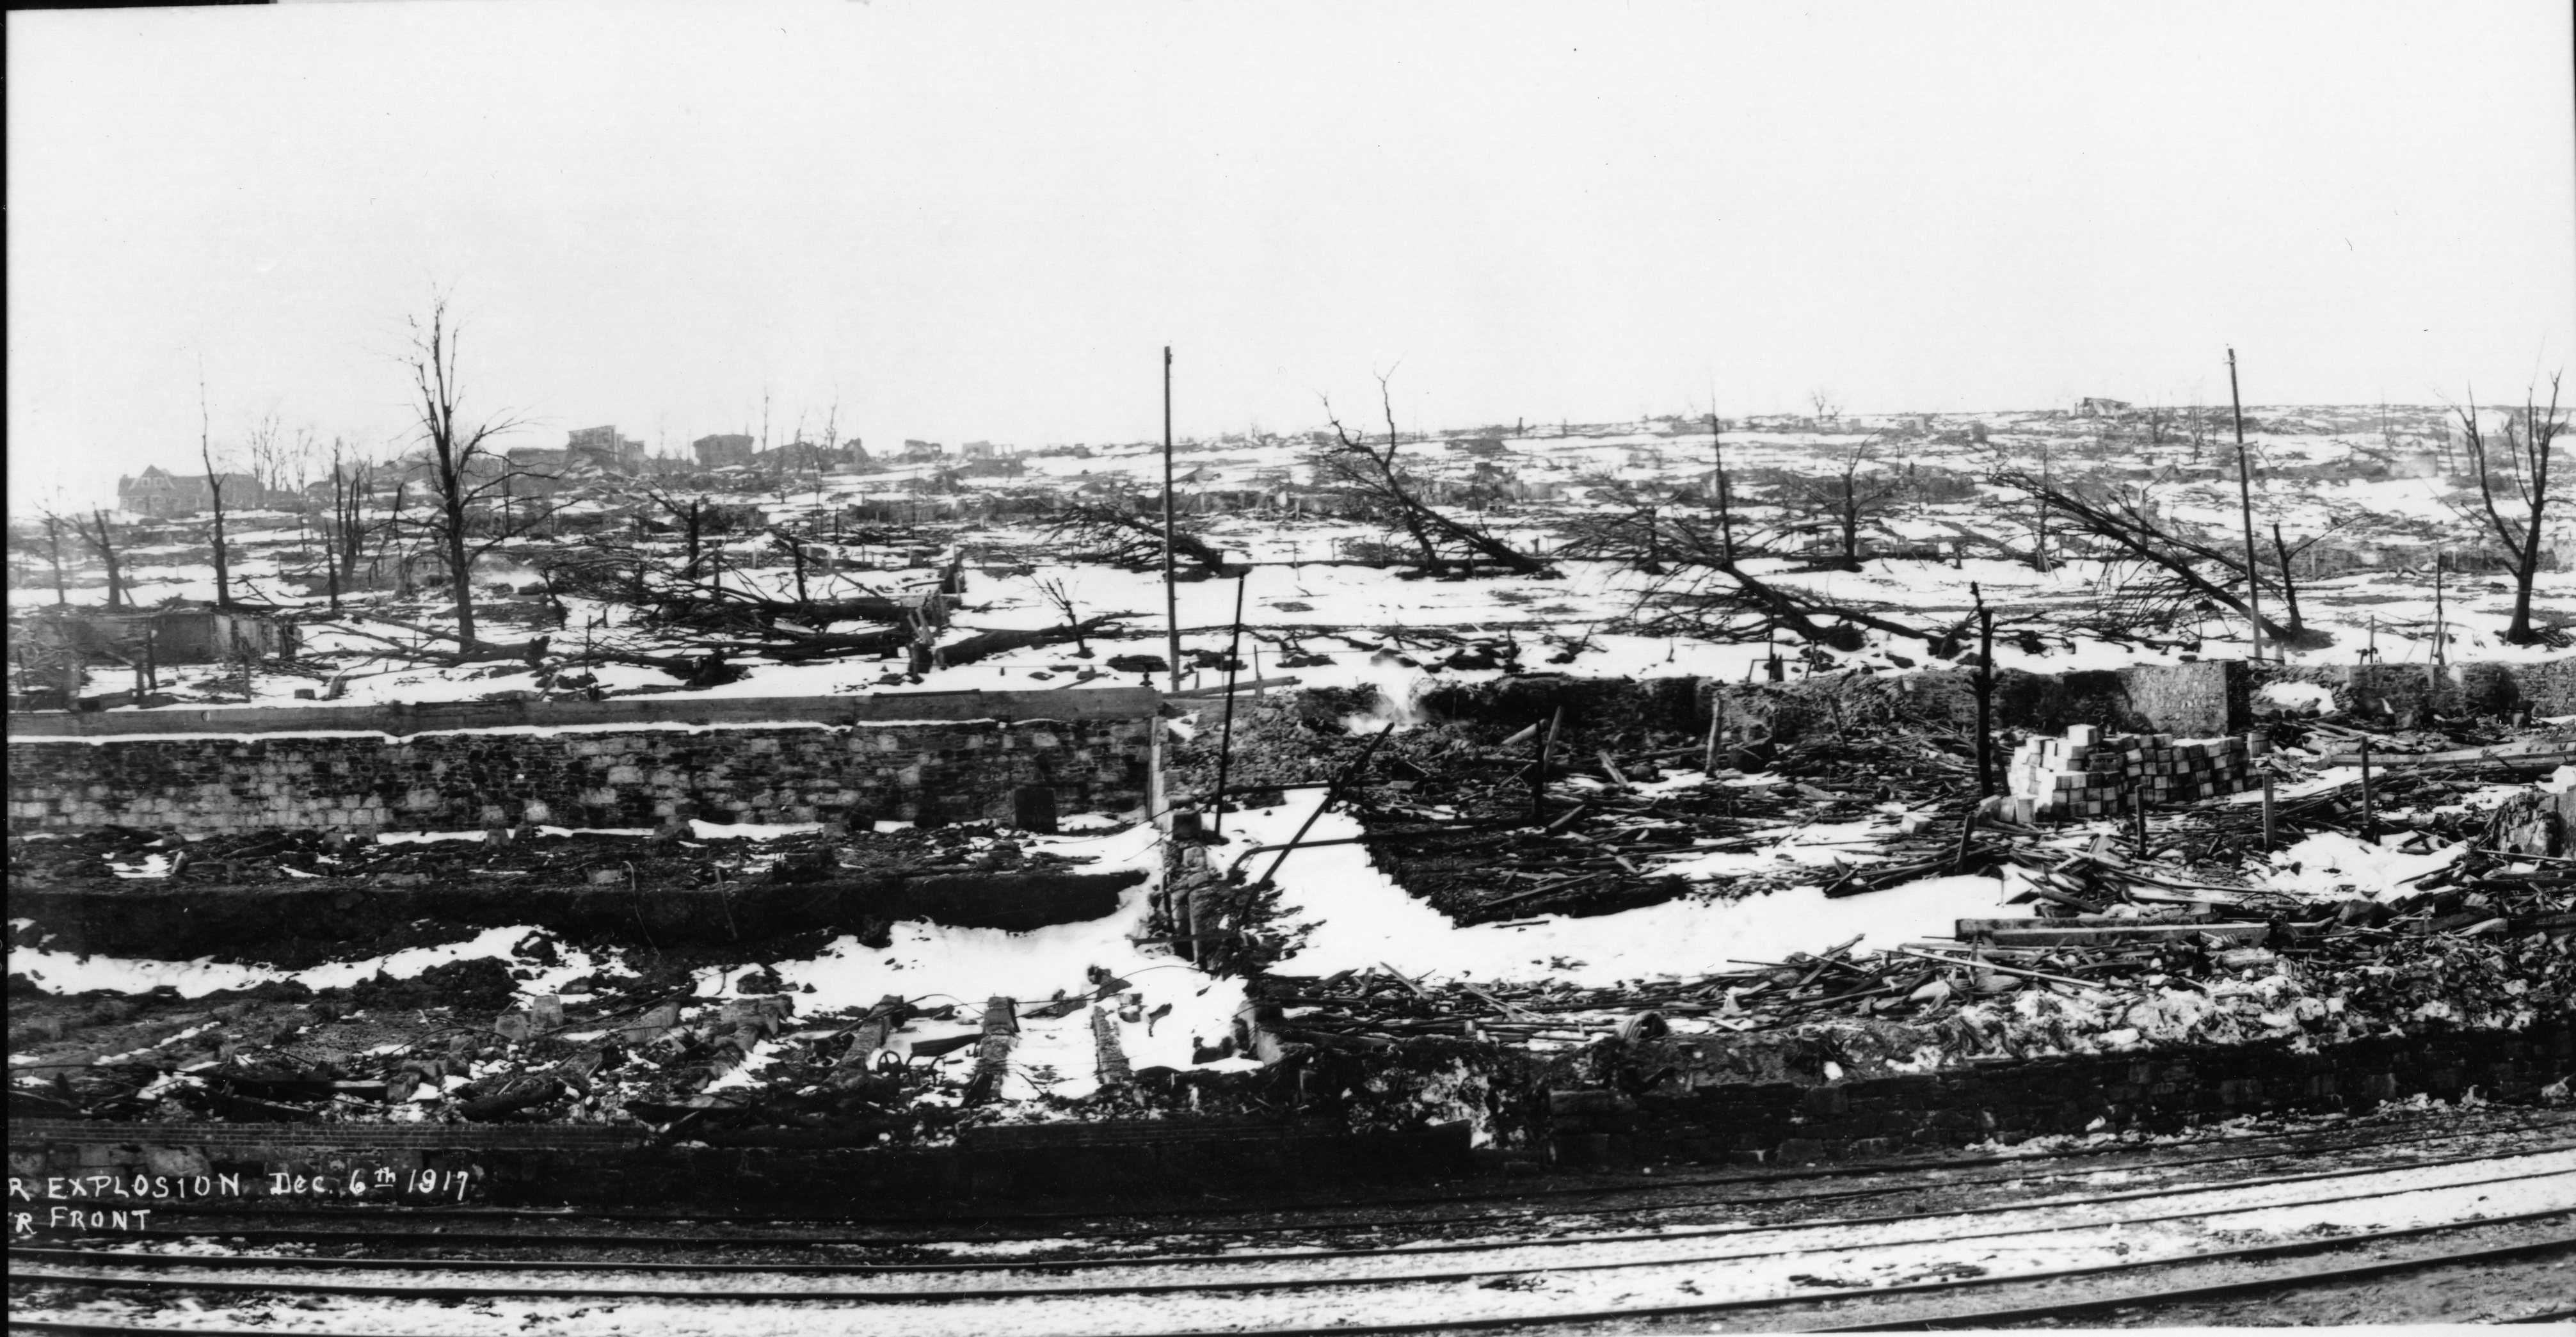 Black and white photograph. Train tracks in immediate foreground. Some structures visible in distance. The foundation and rubble of a building is seen in the centre of the photo. Charred trees and snow on the ground is visible.